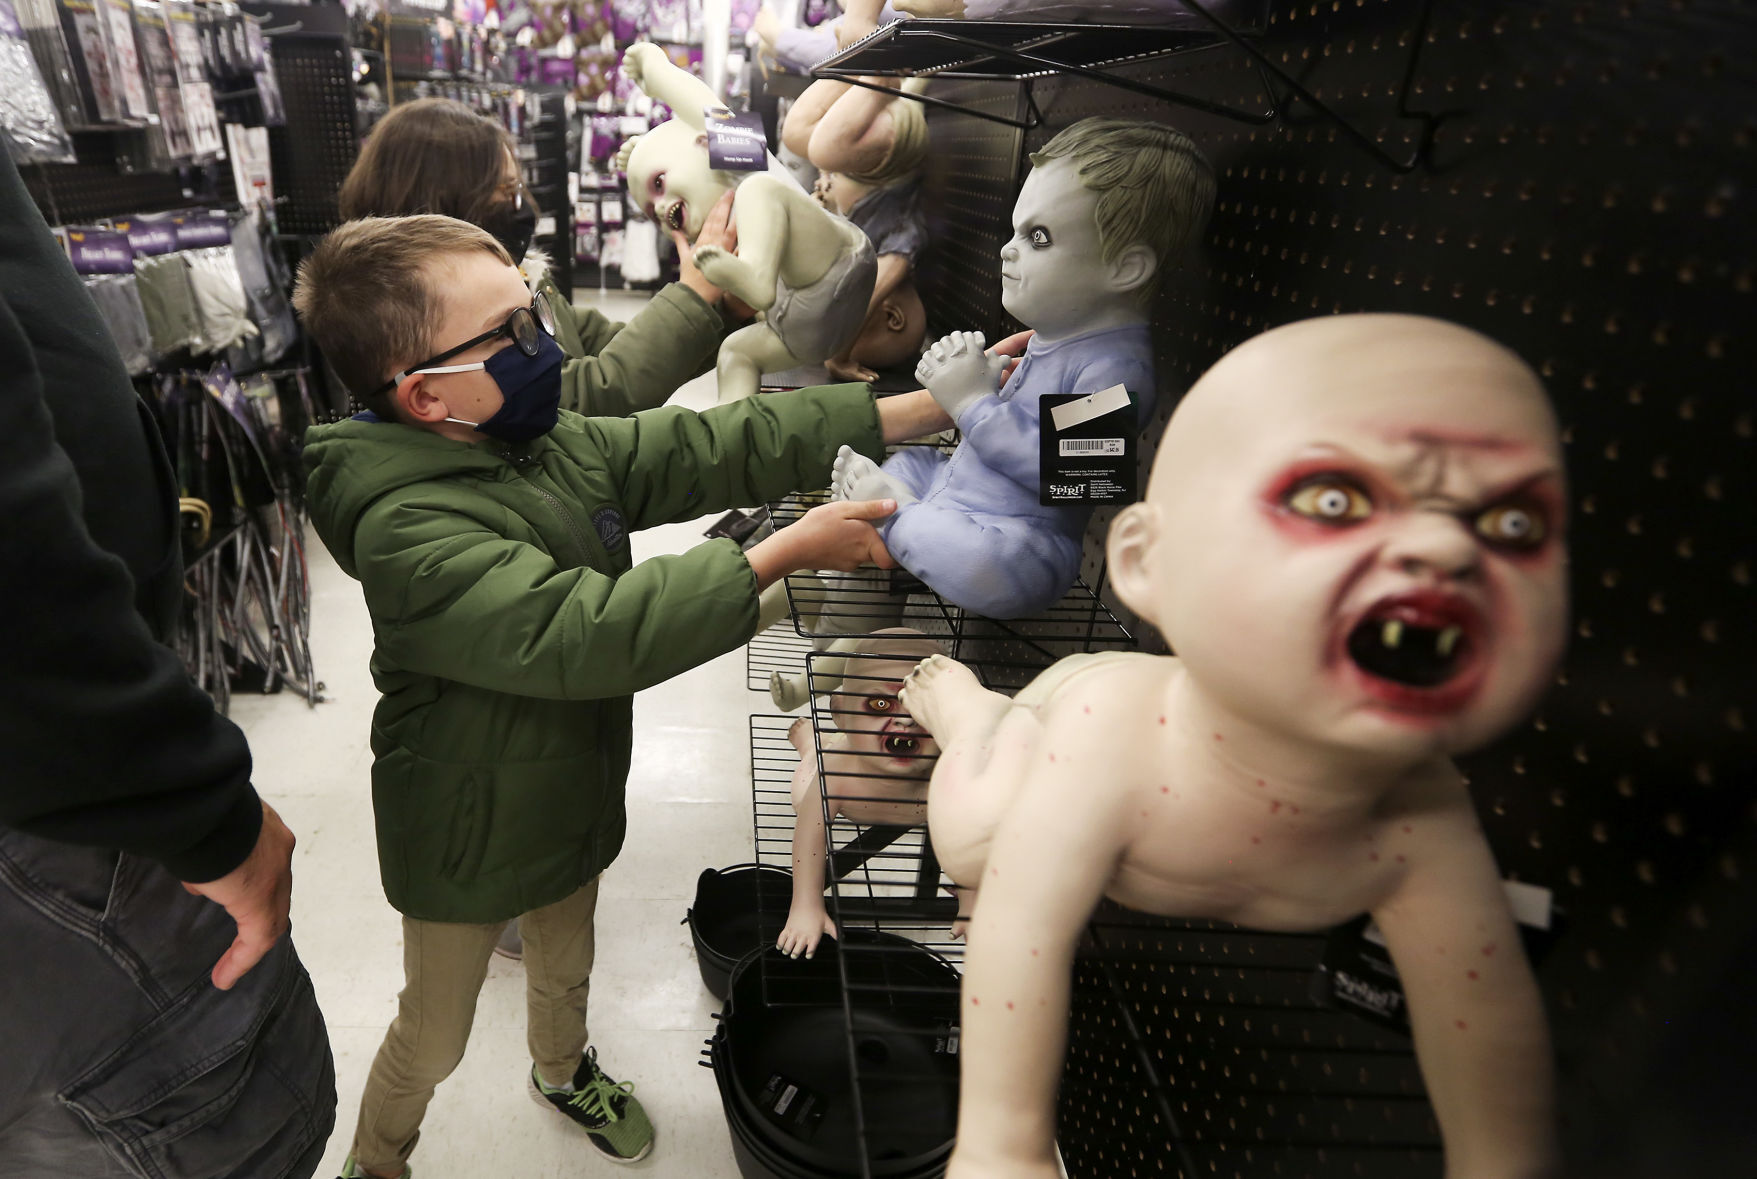 Charlie Huff (front), 7, and Ella Huff, 9, of Dubuque, check out displays while shopping at Spirit Halloween in Dubuque on Tuesday, Oct. 20, 2020. PHOTO CREDIT: NICKI KOHL